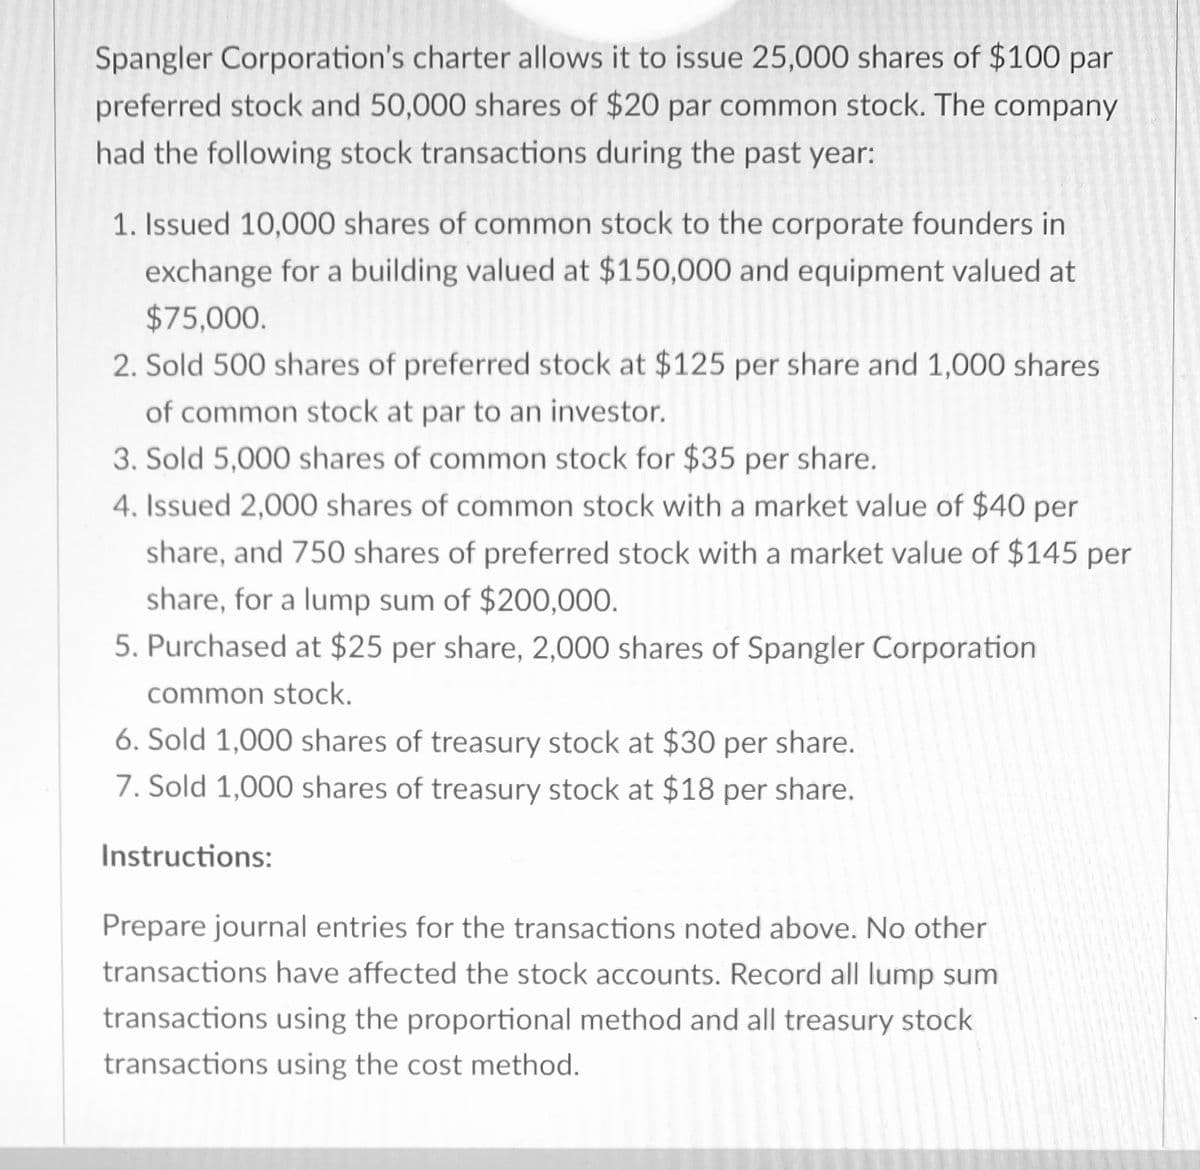 Spangler Corporation's charter allows it to issue 25,000 shares of $100 par
preferred stock and 50,000 shares of $20 par common stock. The company
had the following stock transactions during the past year:
1. Issued 10,000 shares of common stock to the corporate founders in
exchange for a building valued at $150,000 and equipment valued at
$75,000.
2. Sold 500 shares of preferred stock at $125 per share and 1,000 shares
of common stock at par to an investor.
3. Sold 5,000 shares of common stock for $35 per share.
4. Issued 2,000 shares of common stock with a market value of $40 per
share, and 750 shares of preferred stock with a market value of $145 per
share, for a lump sum of $200,000.
5. Purchased at $25 per share, 2,000 shares of Spangler Corporation
common stock.
6. Sold 1,000 shares of treasury stock at $30 per share.
7. Sold 1,000 shares of treasury stock at $18 per share.
Instructions:
Prepare journal entries for the transactions noted above. No other
transactions have affected the stock accounts. Record all lump sum
transactions using the proportional method and all treasury stock
transactions using the cost method.